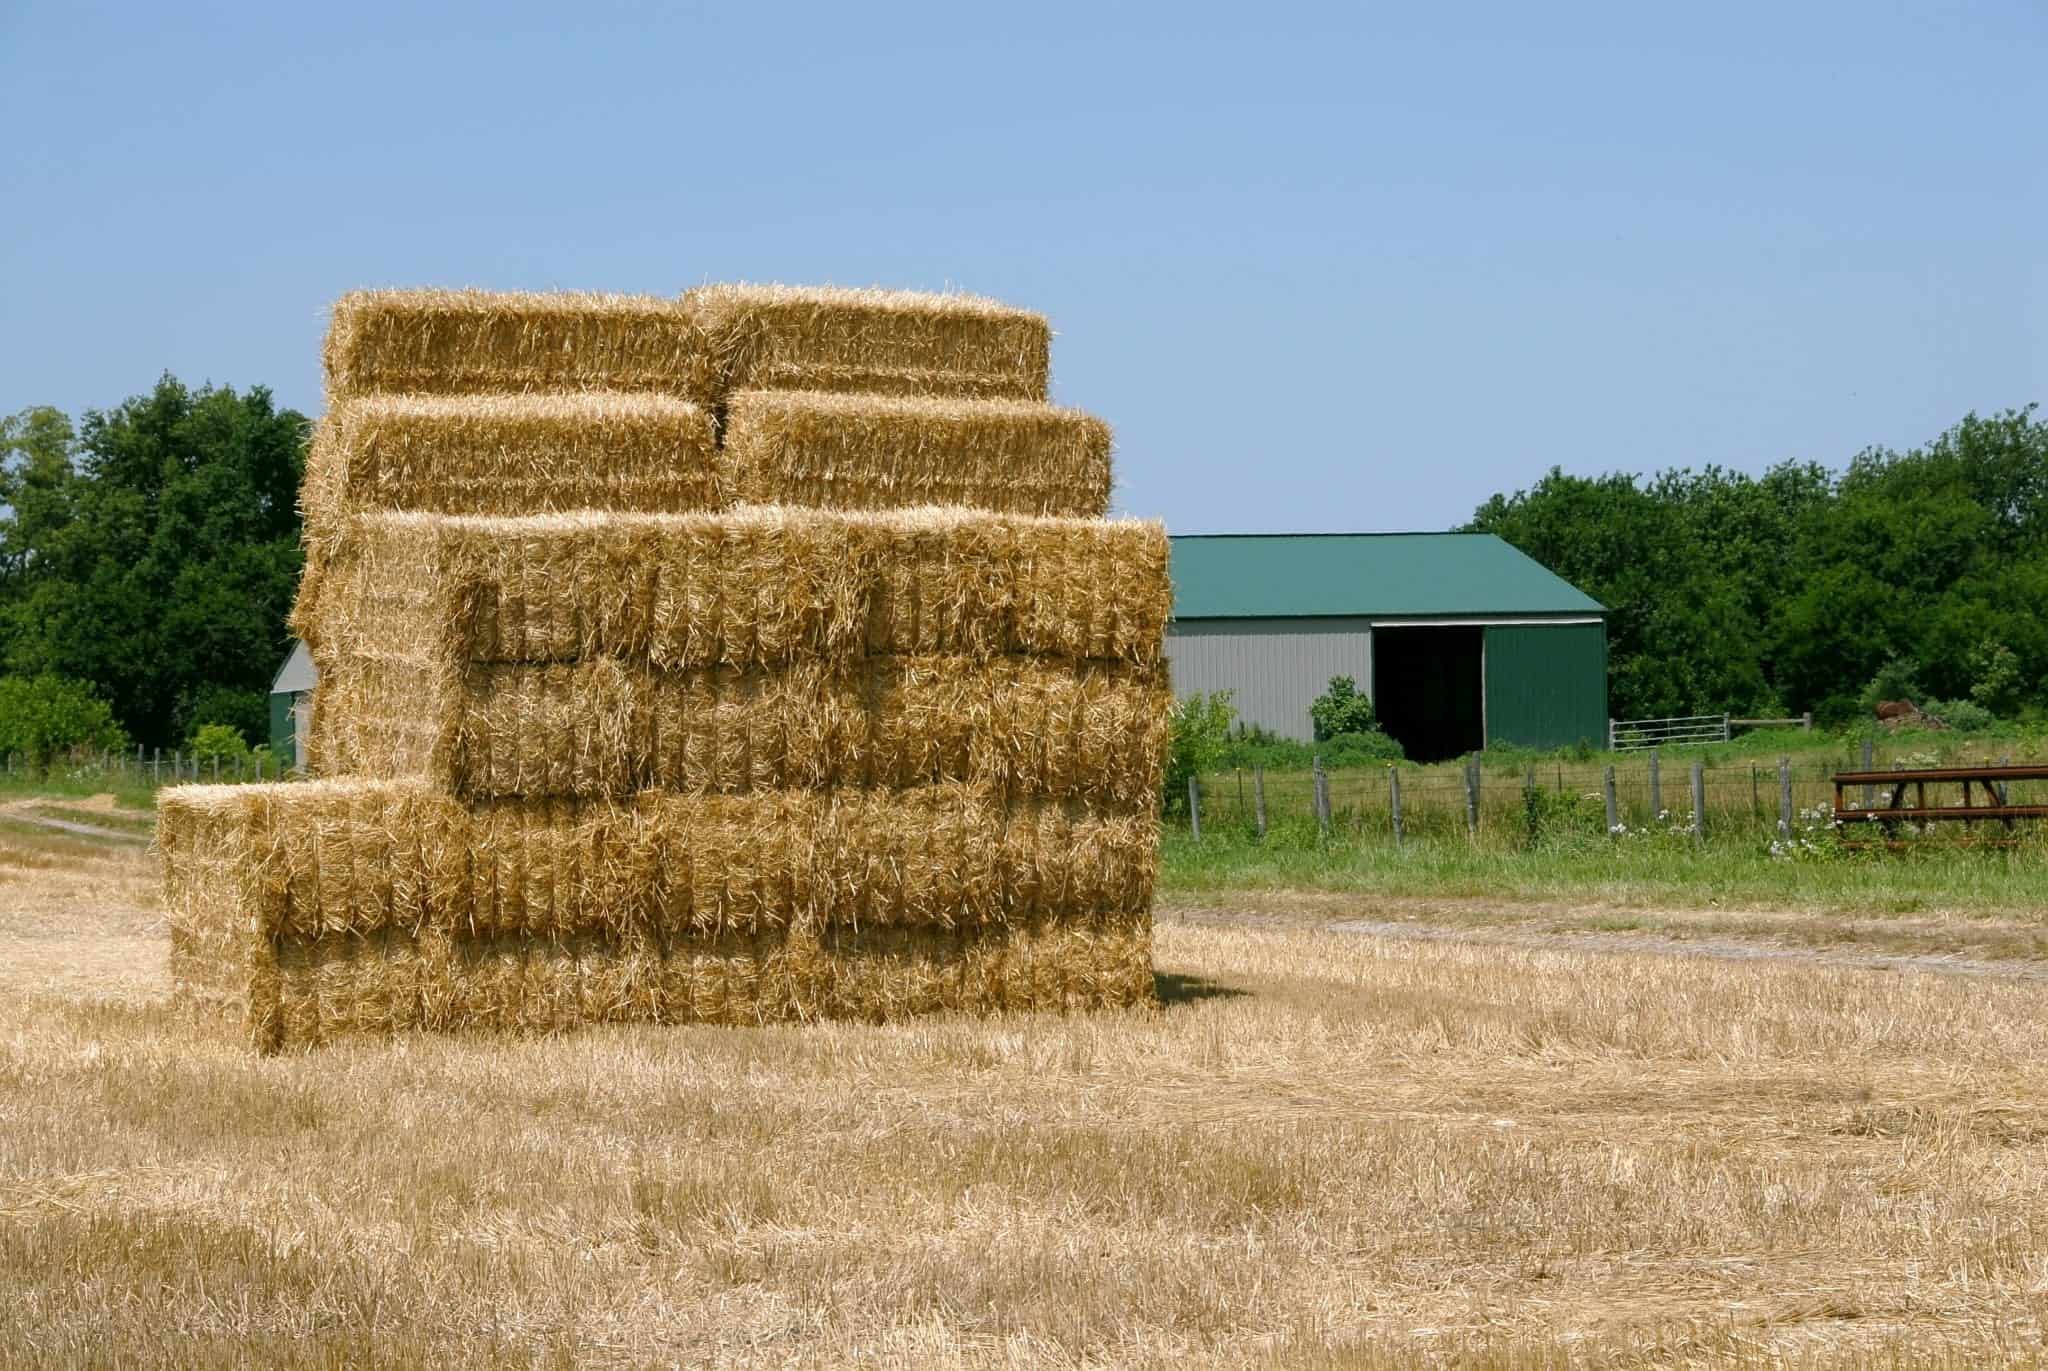 A stack of hay bales in the field of a farm in summer.